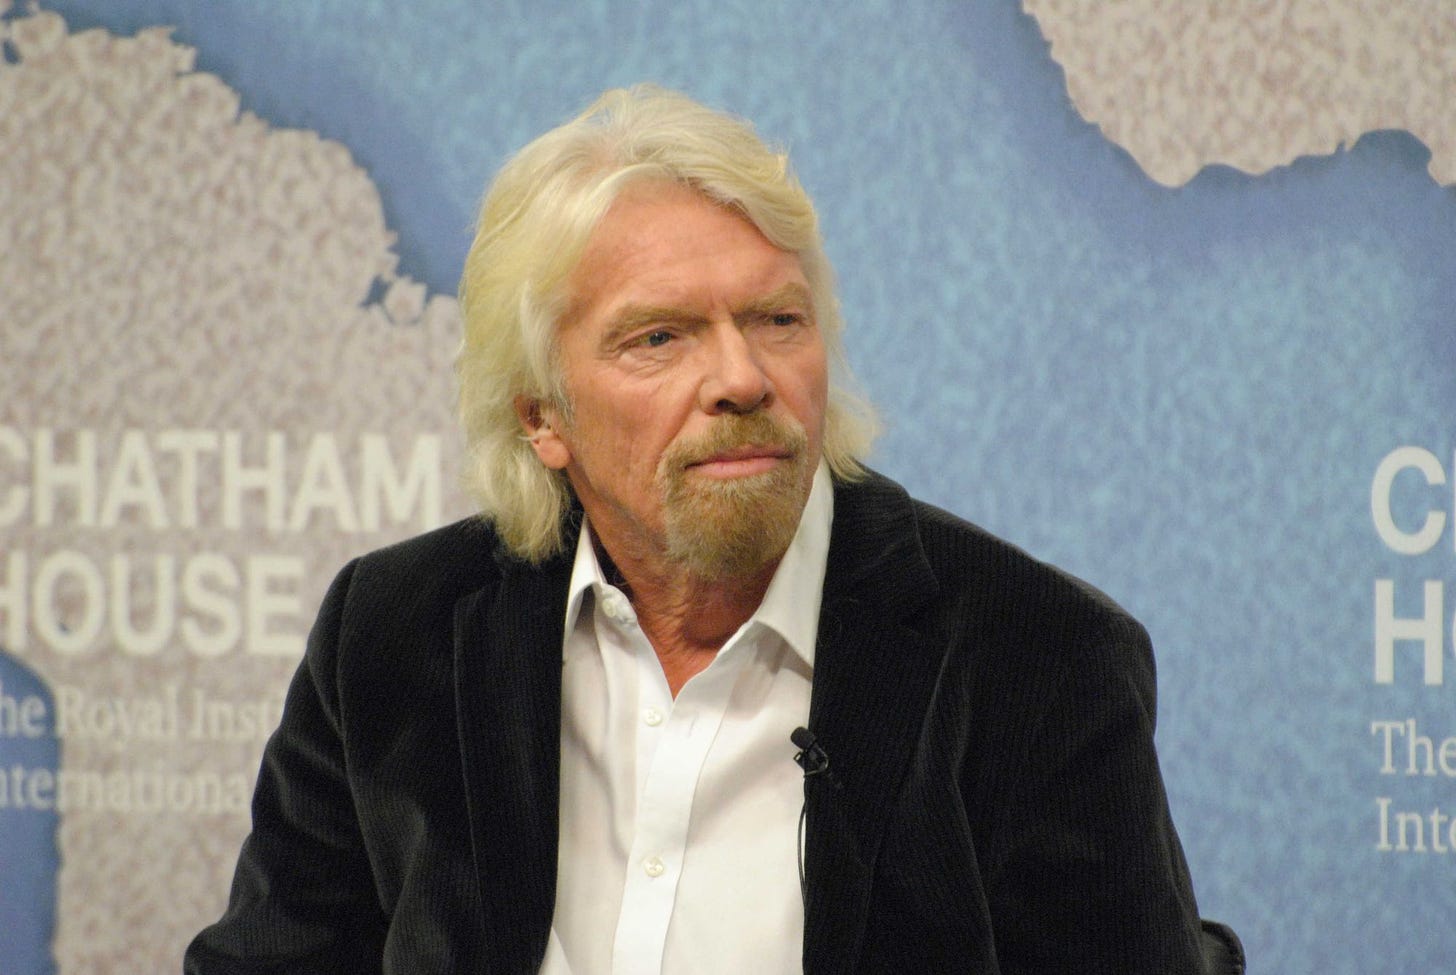 Richard Branson blogs about a story of Generosity that brought a couple together